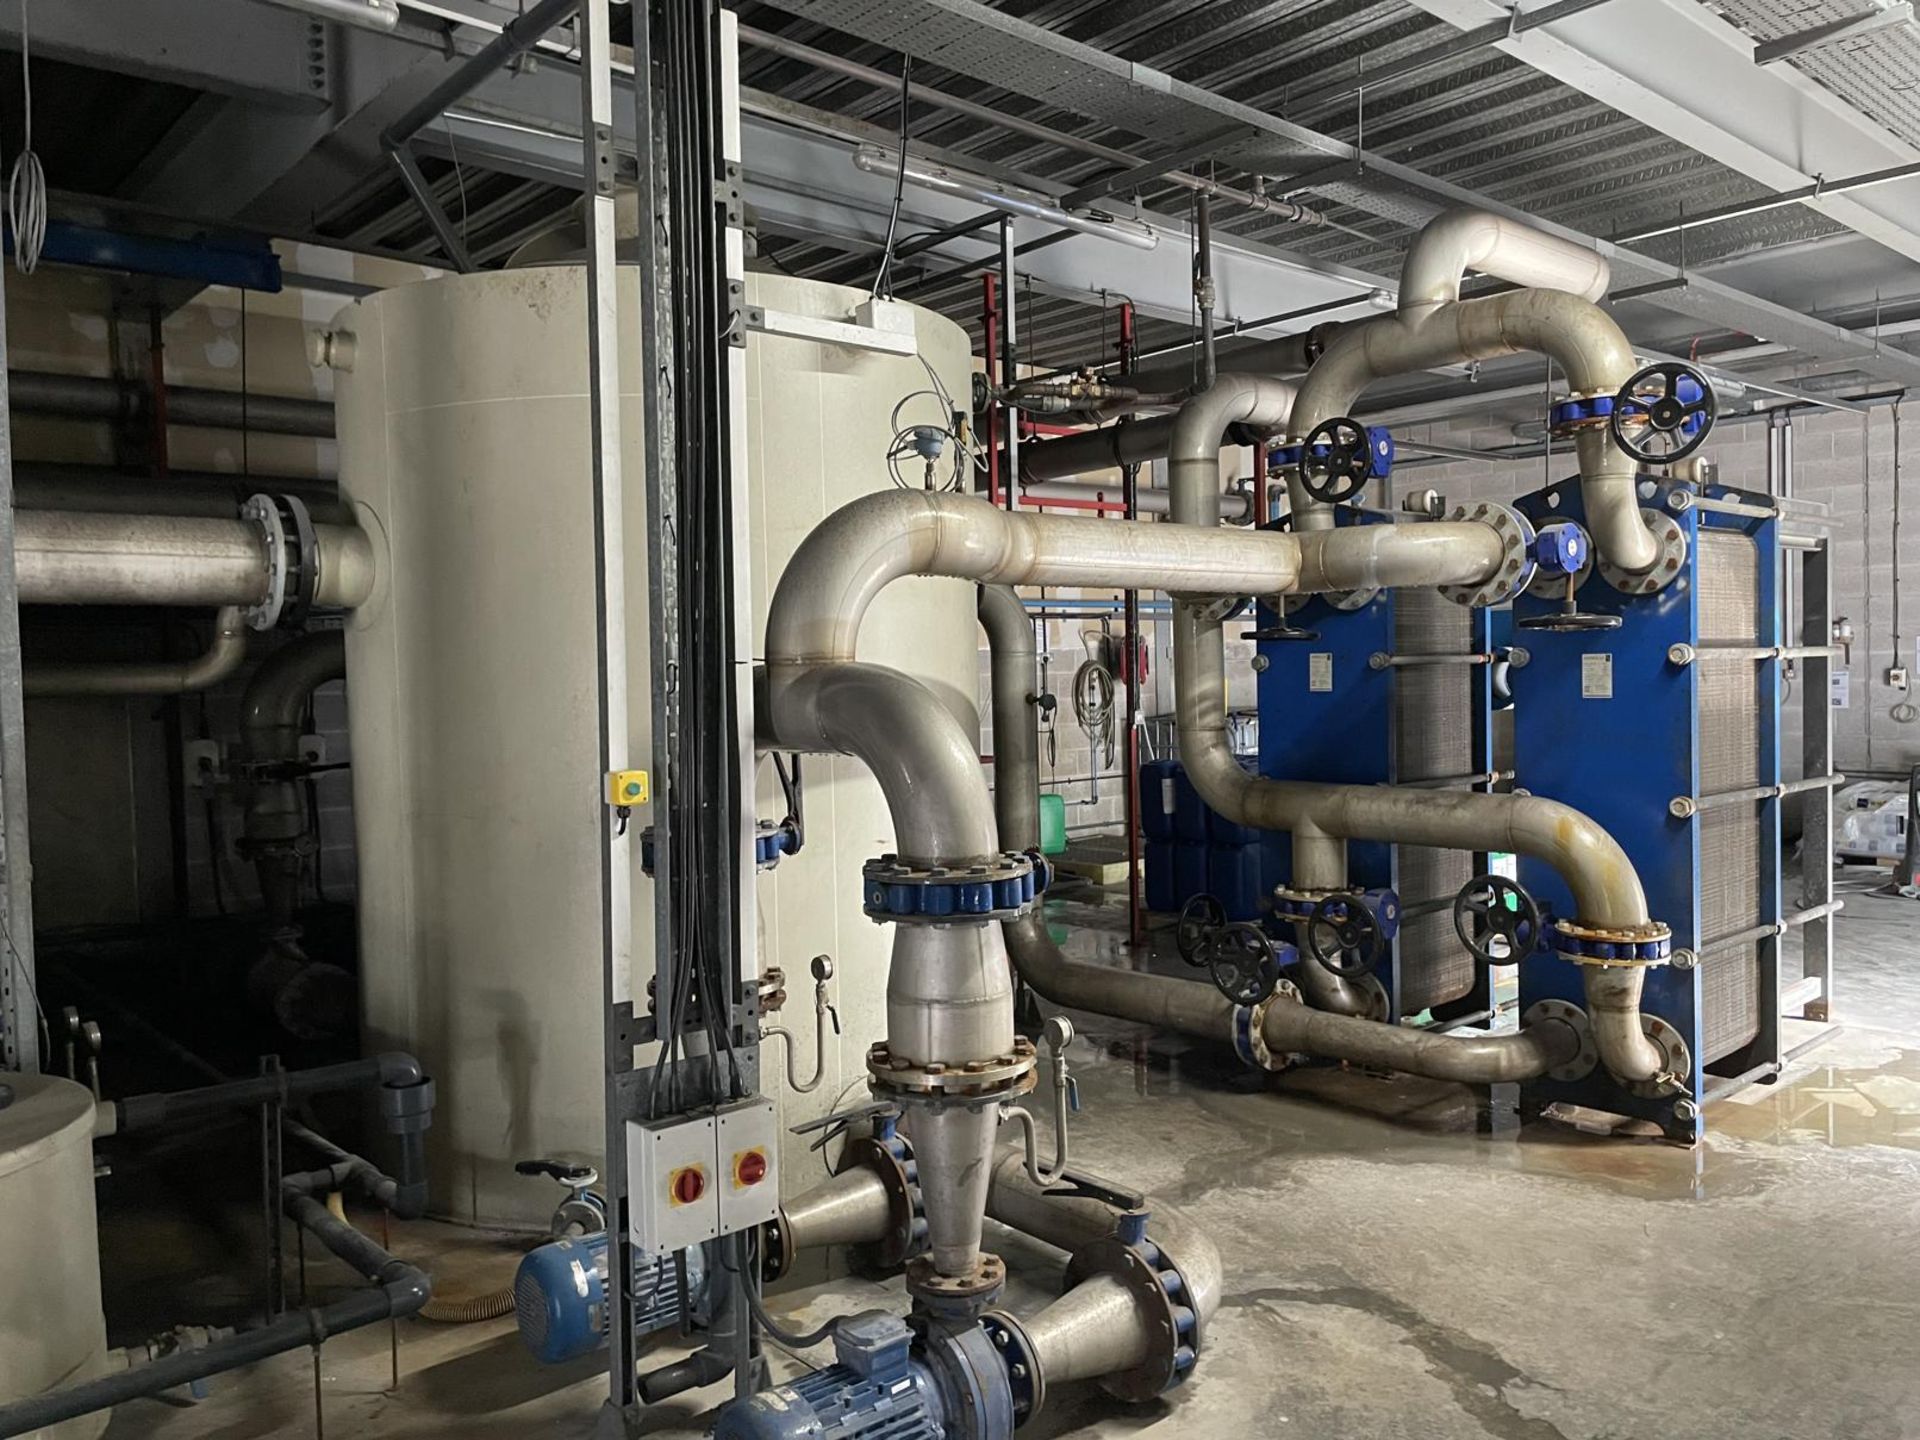 Chilled Water Plant Including Insulated Tank, 2 Sondex S86-IC Heat Exchanger Units, Pipework, Pumps